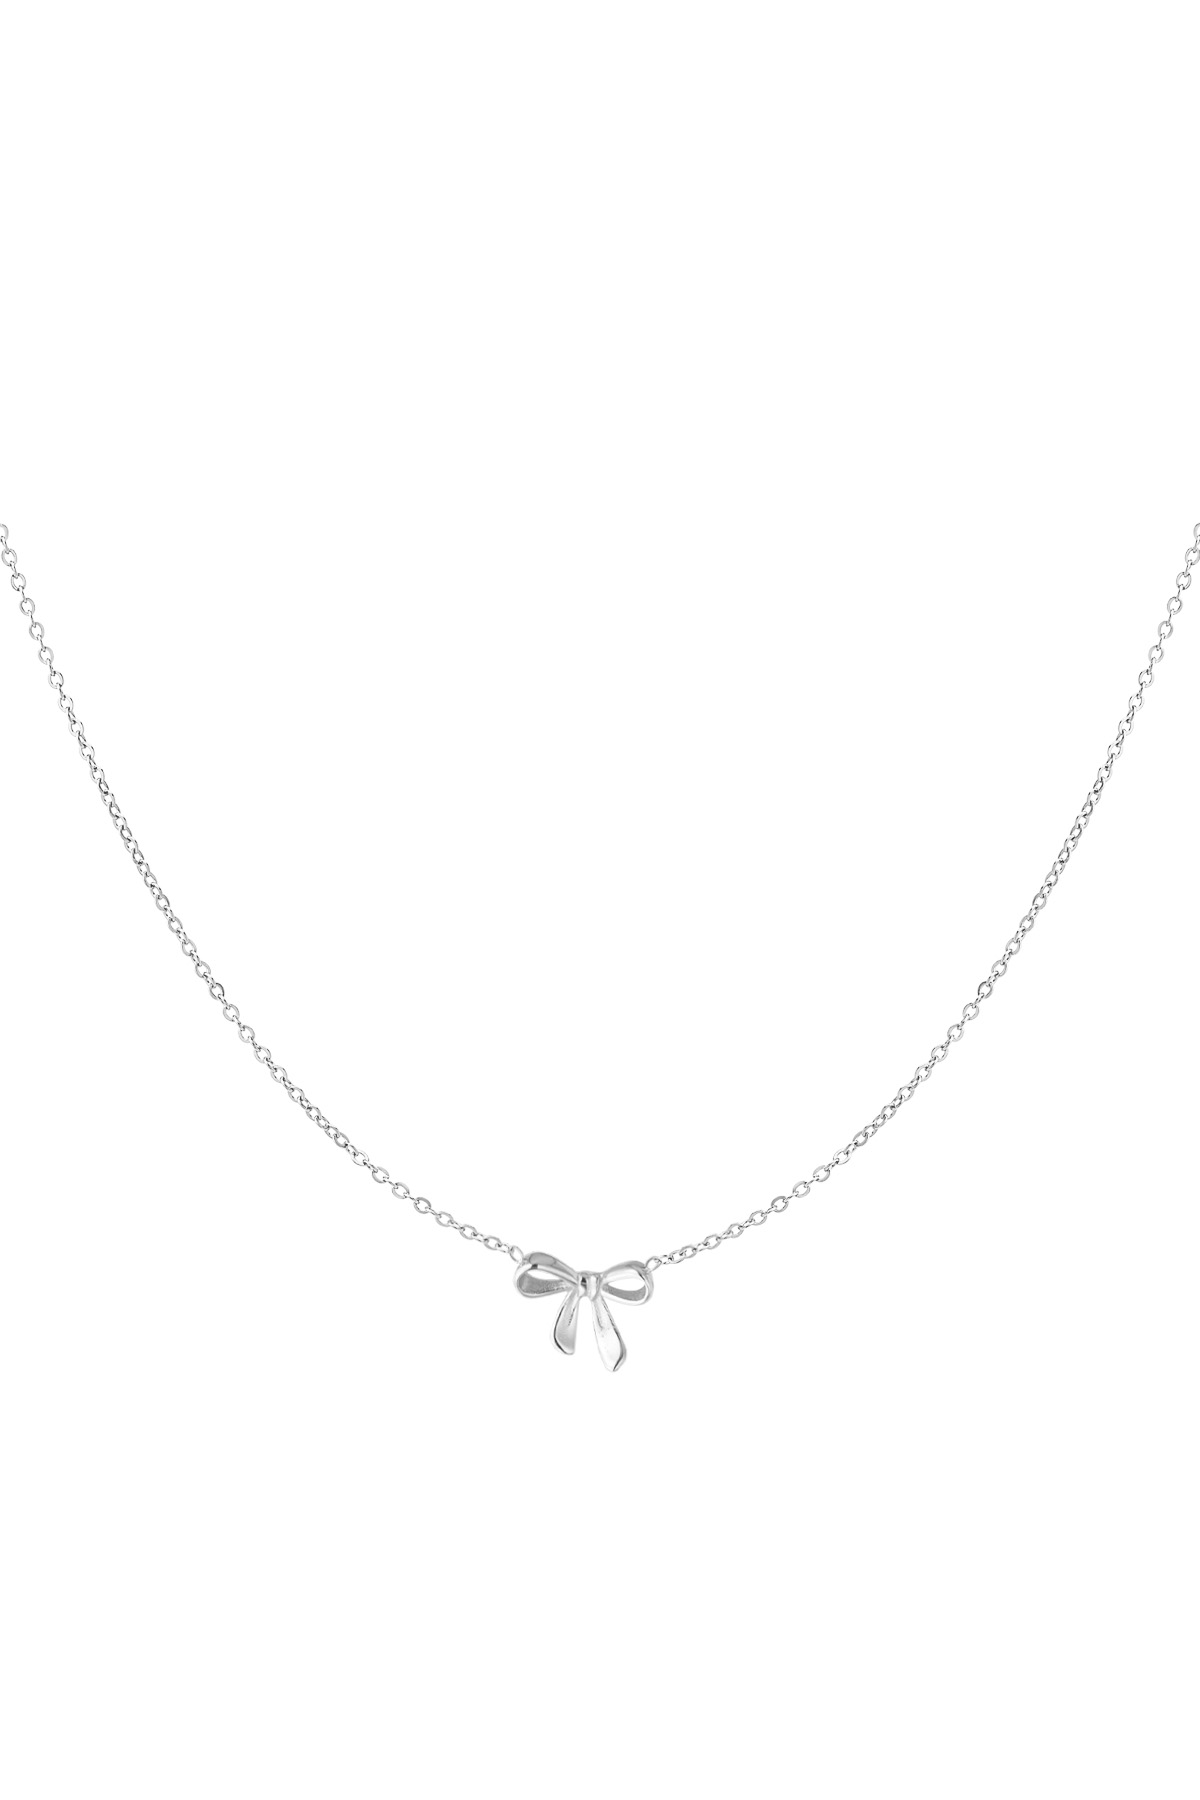 Necklace bows dream - silver h5 